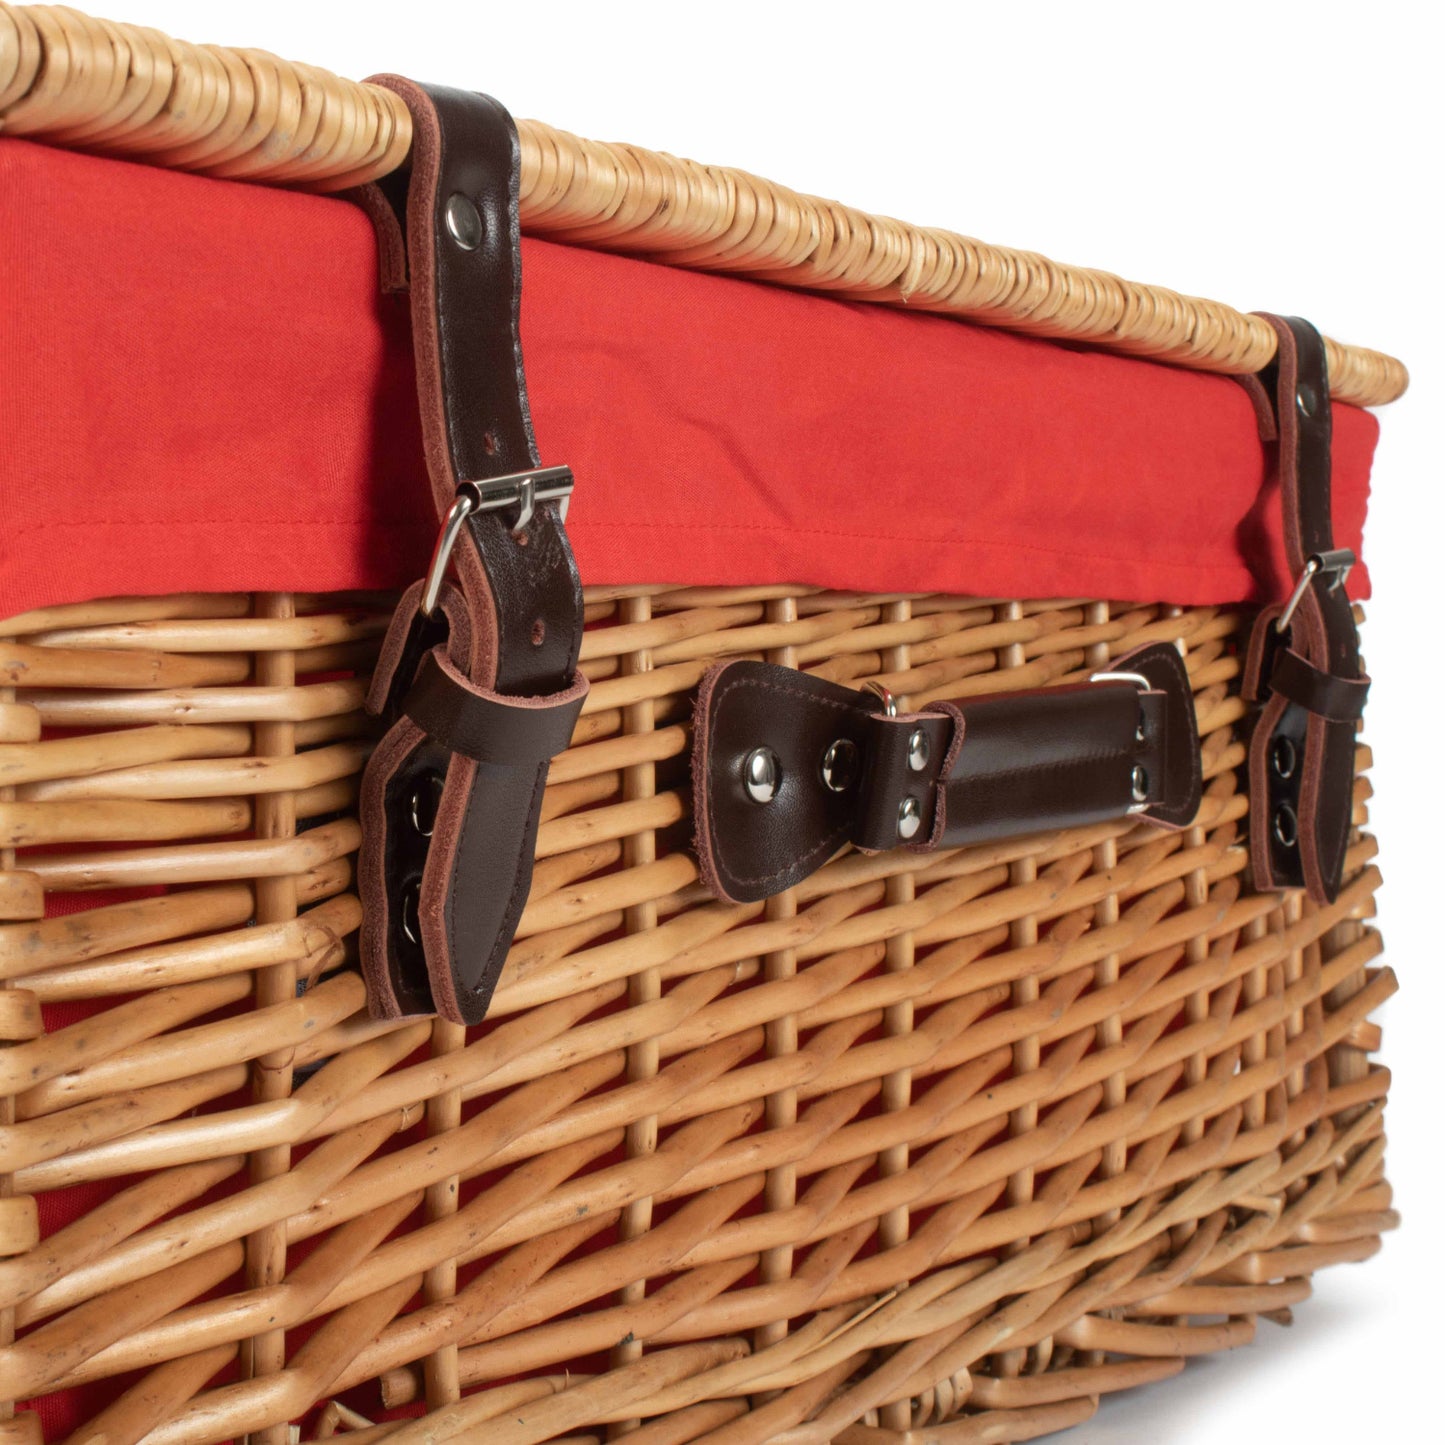 22 Inch Buff Hamper With Red Lining